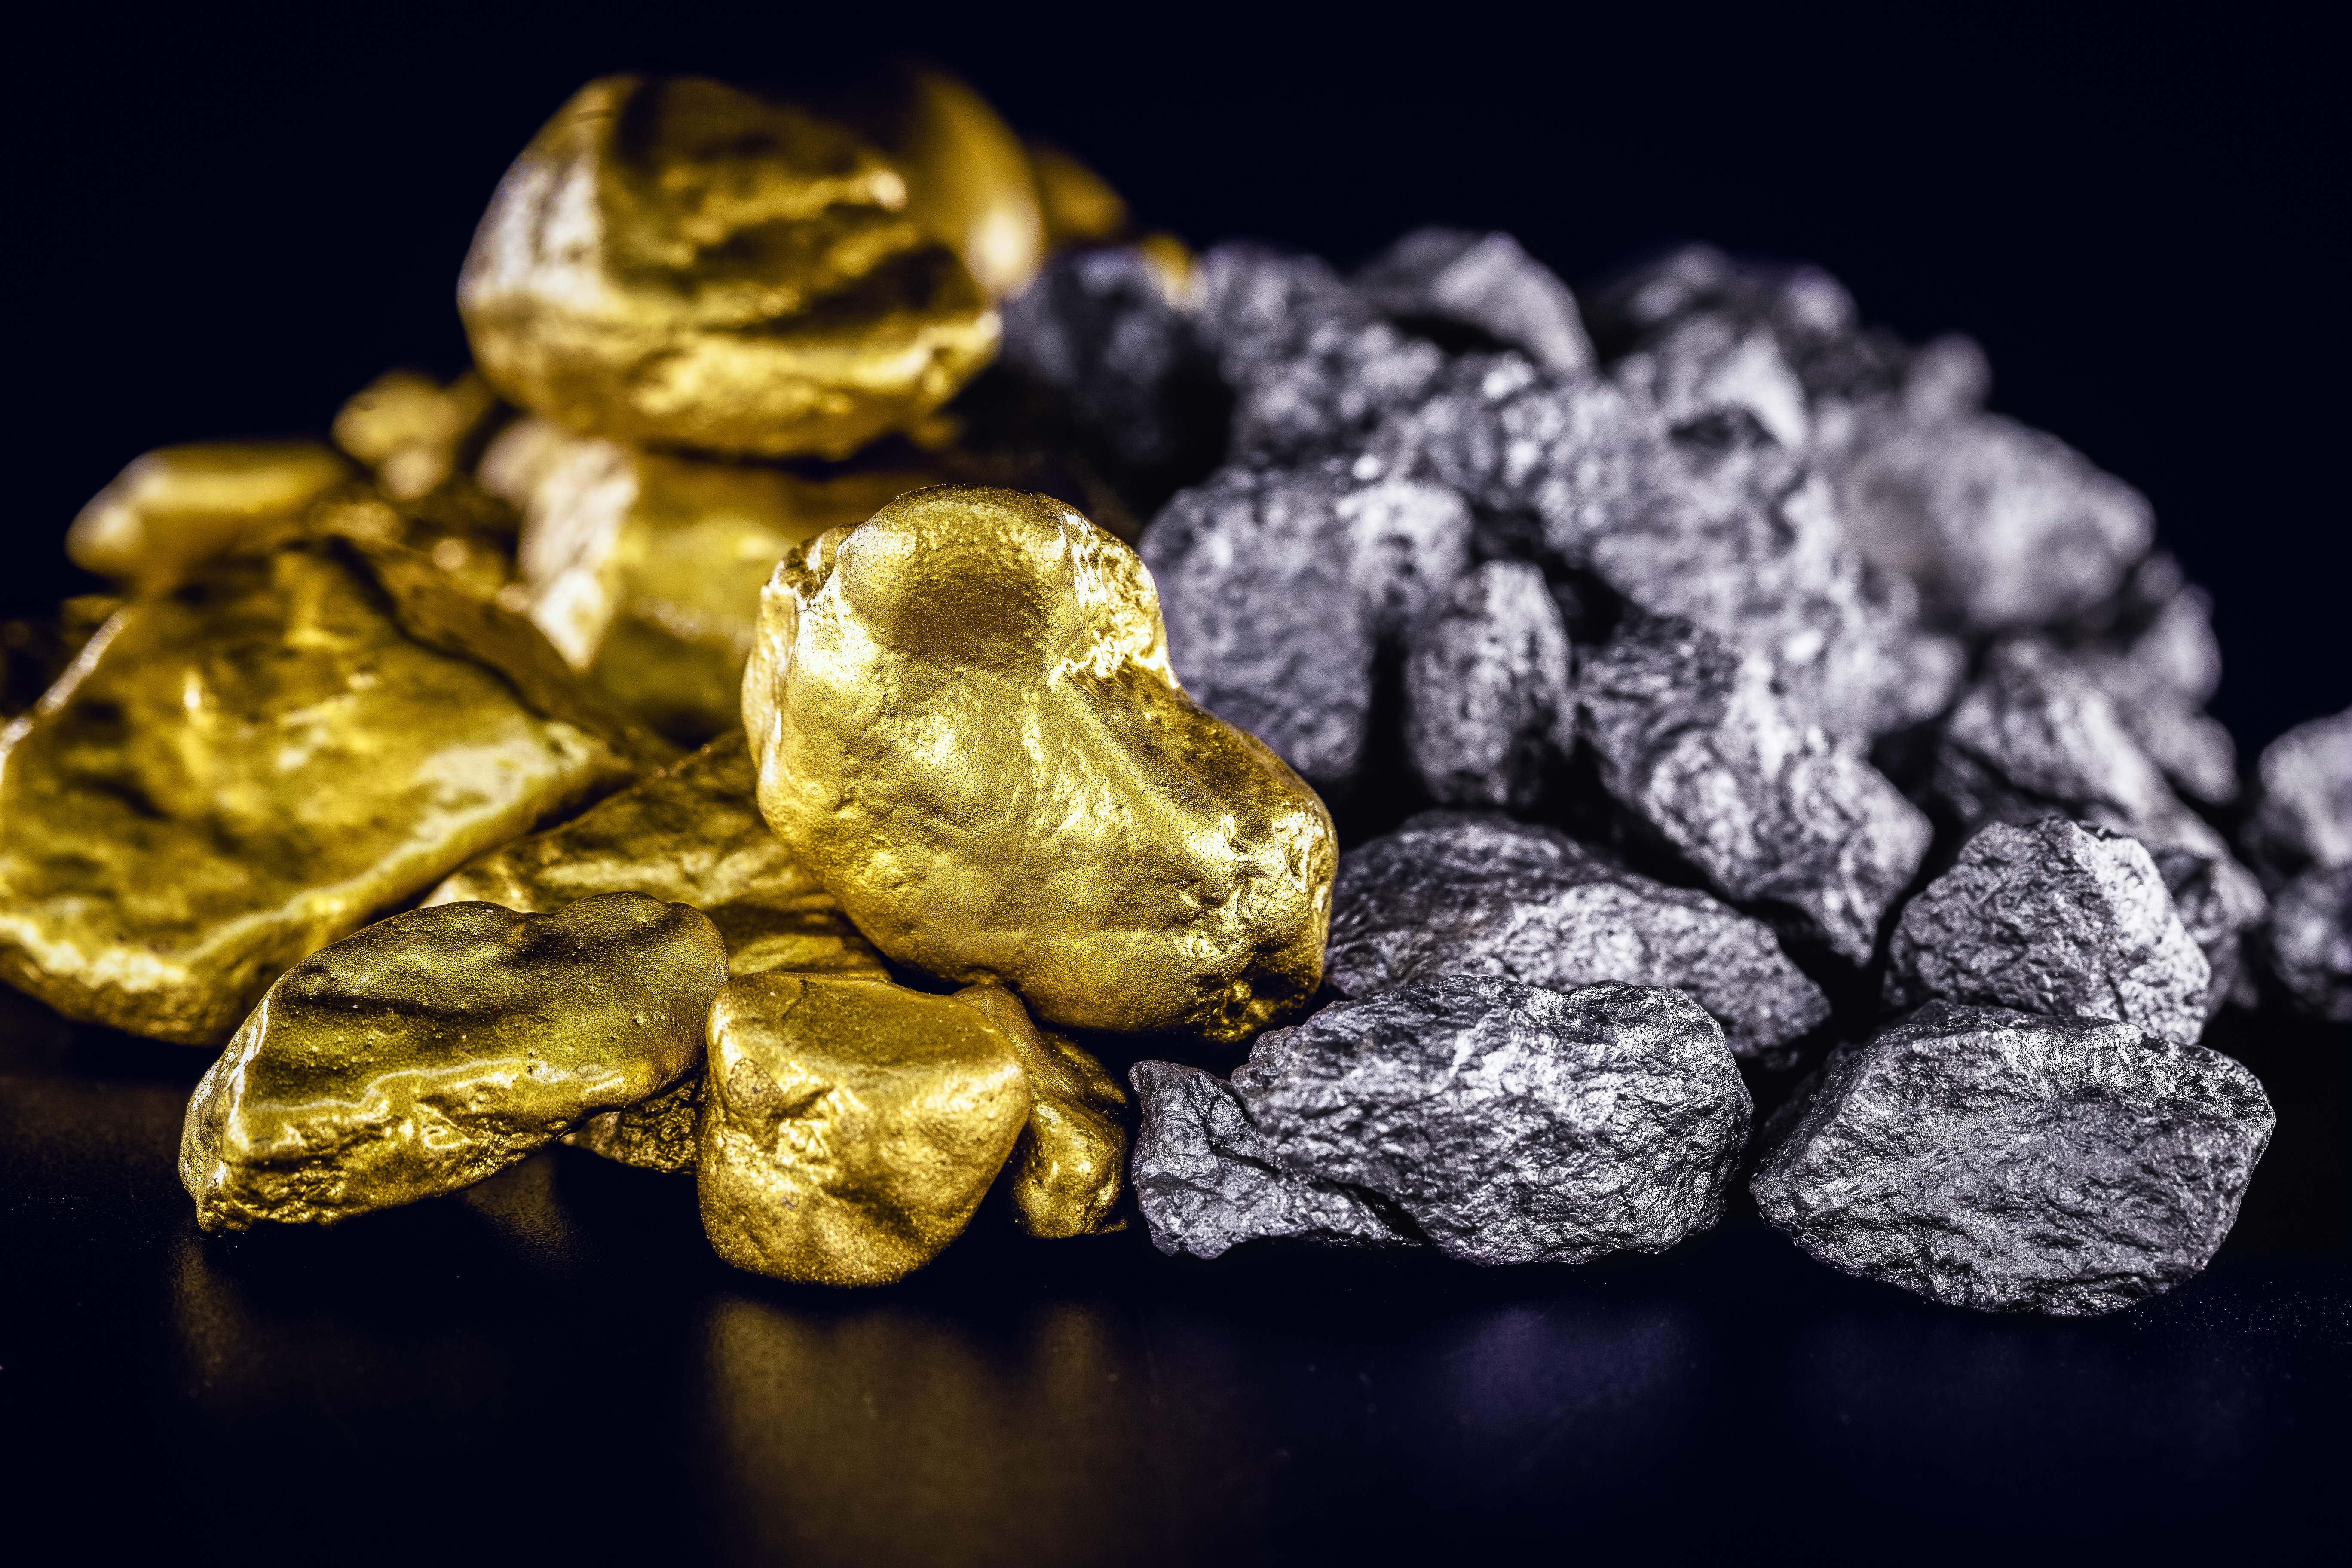 Gold prices to hit ,200 and silver could ‘really shine’ this year, UBS says